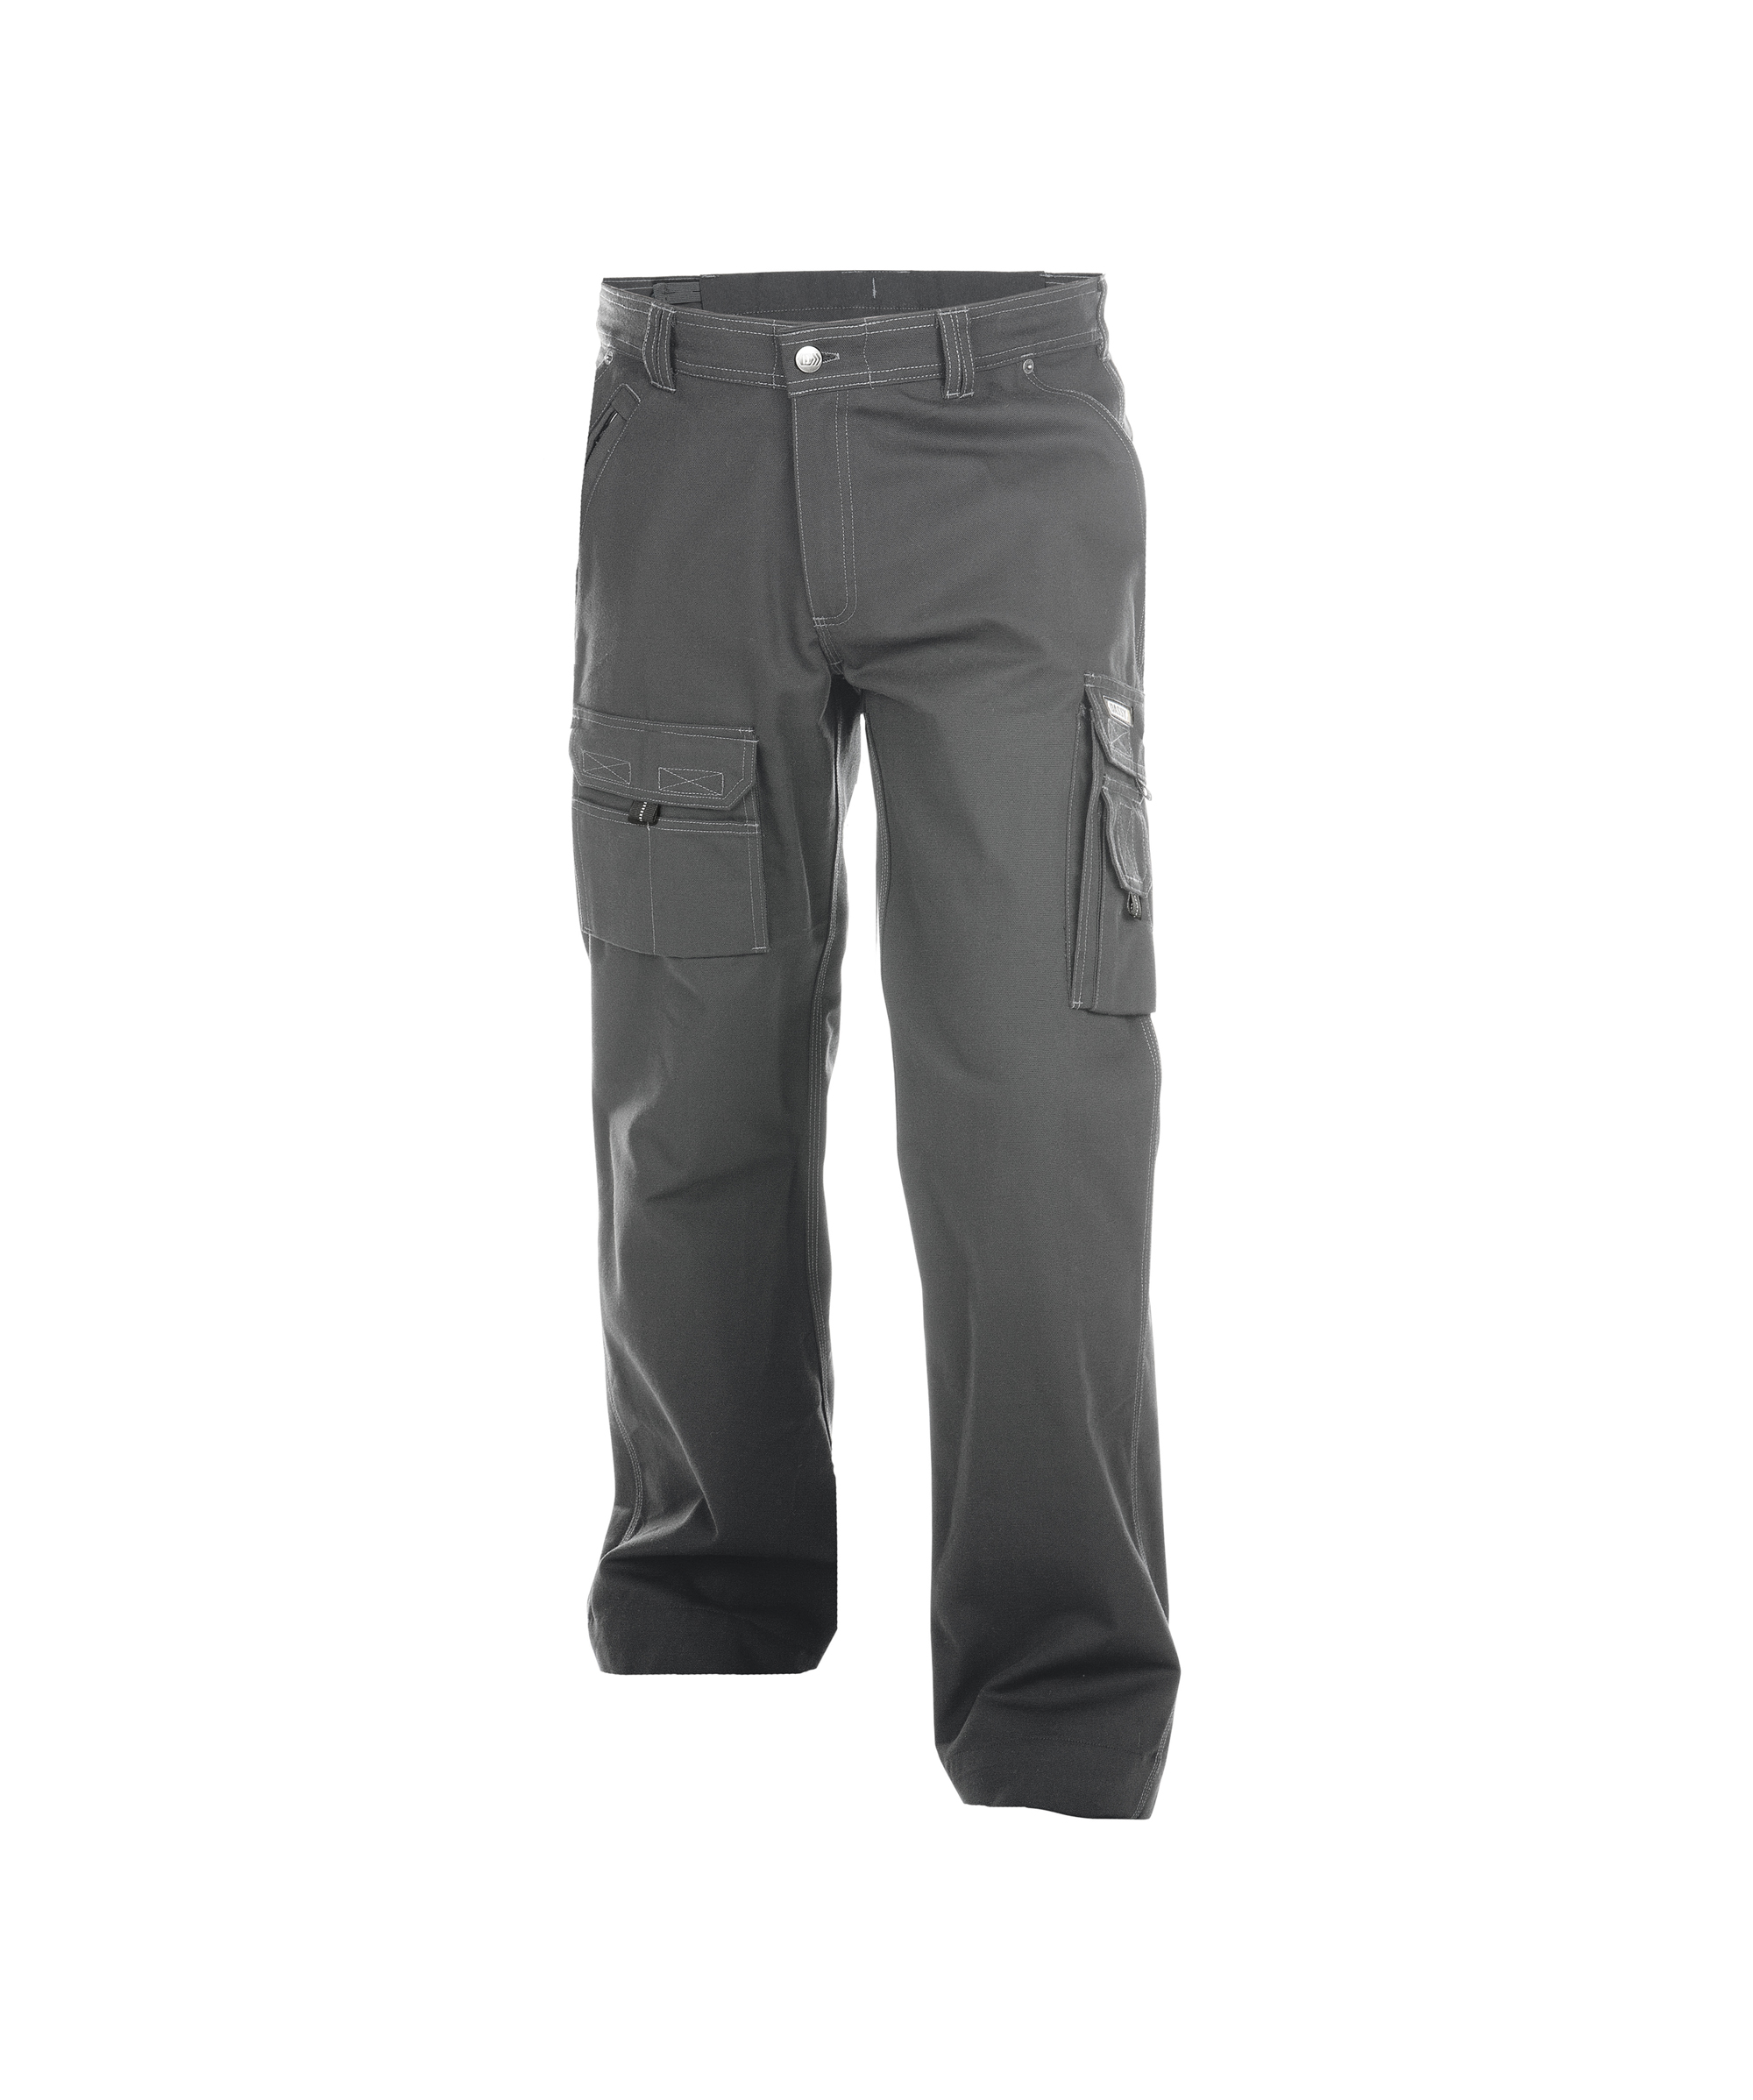 kingston_canvas-work-trousers_cement-grey_front.jpg